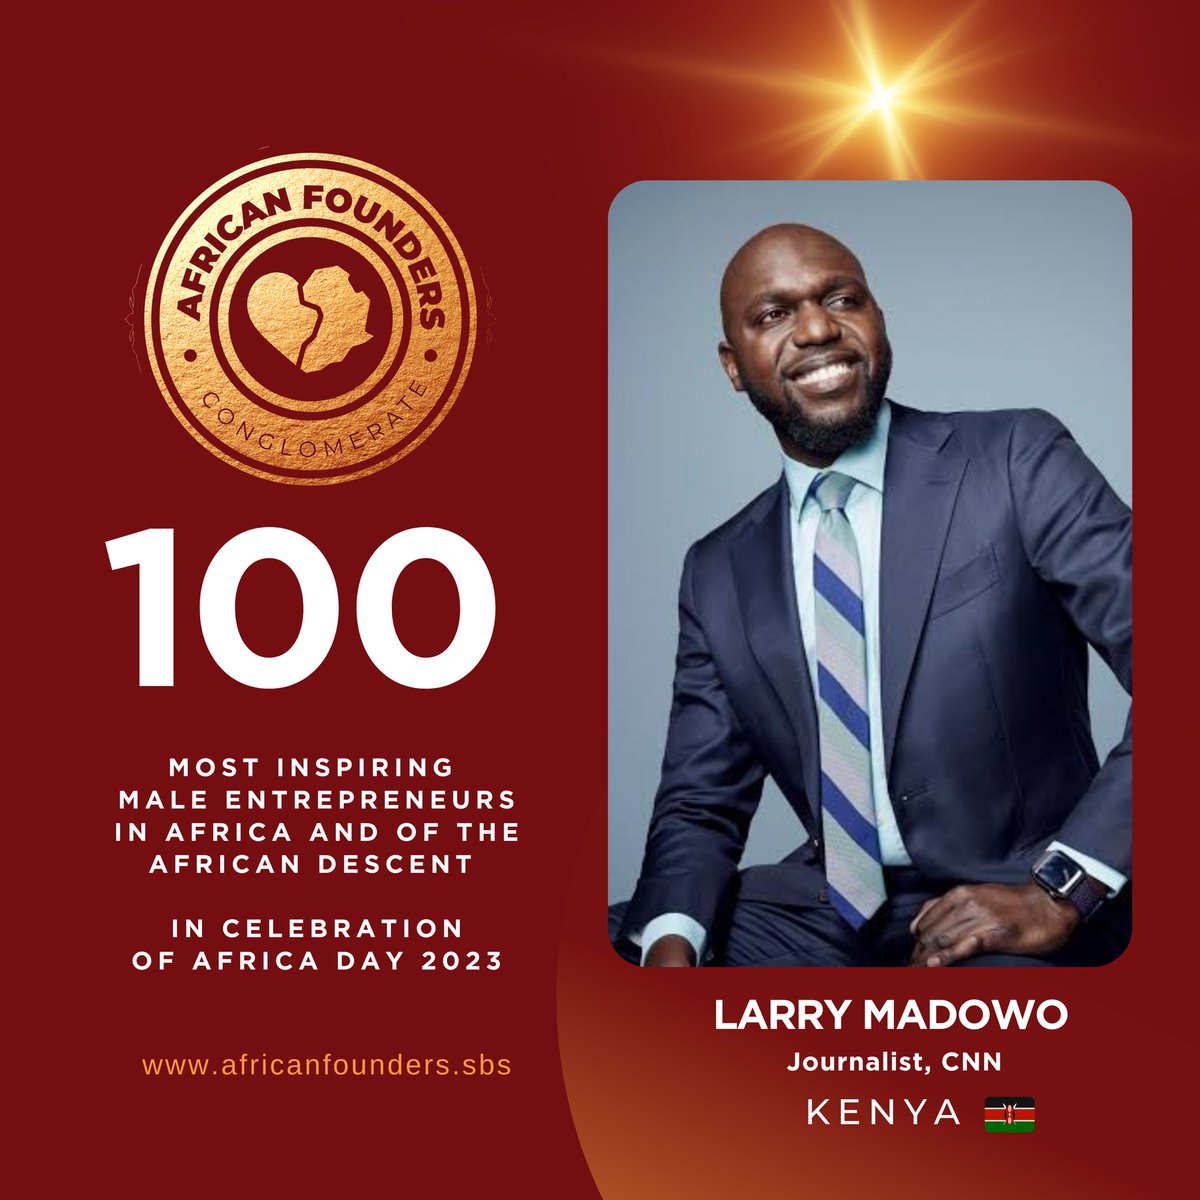 #AFCFeatures | In celebration of AFRICA DAY , we honor @LarryMadowo for his resilience, achievements and great entrepreneurial spirit.

African Founders Feature.
#100mostinspiringmaleentrepreneurs
.
AFRICAN FOUNDERS CONGLOMERATE | Promoting Entrepreneurship & Lifestyle